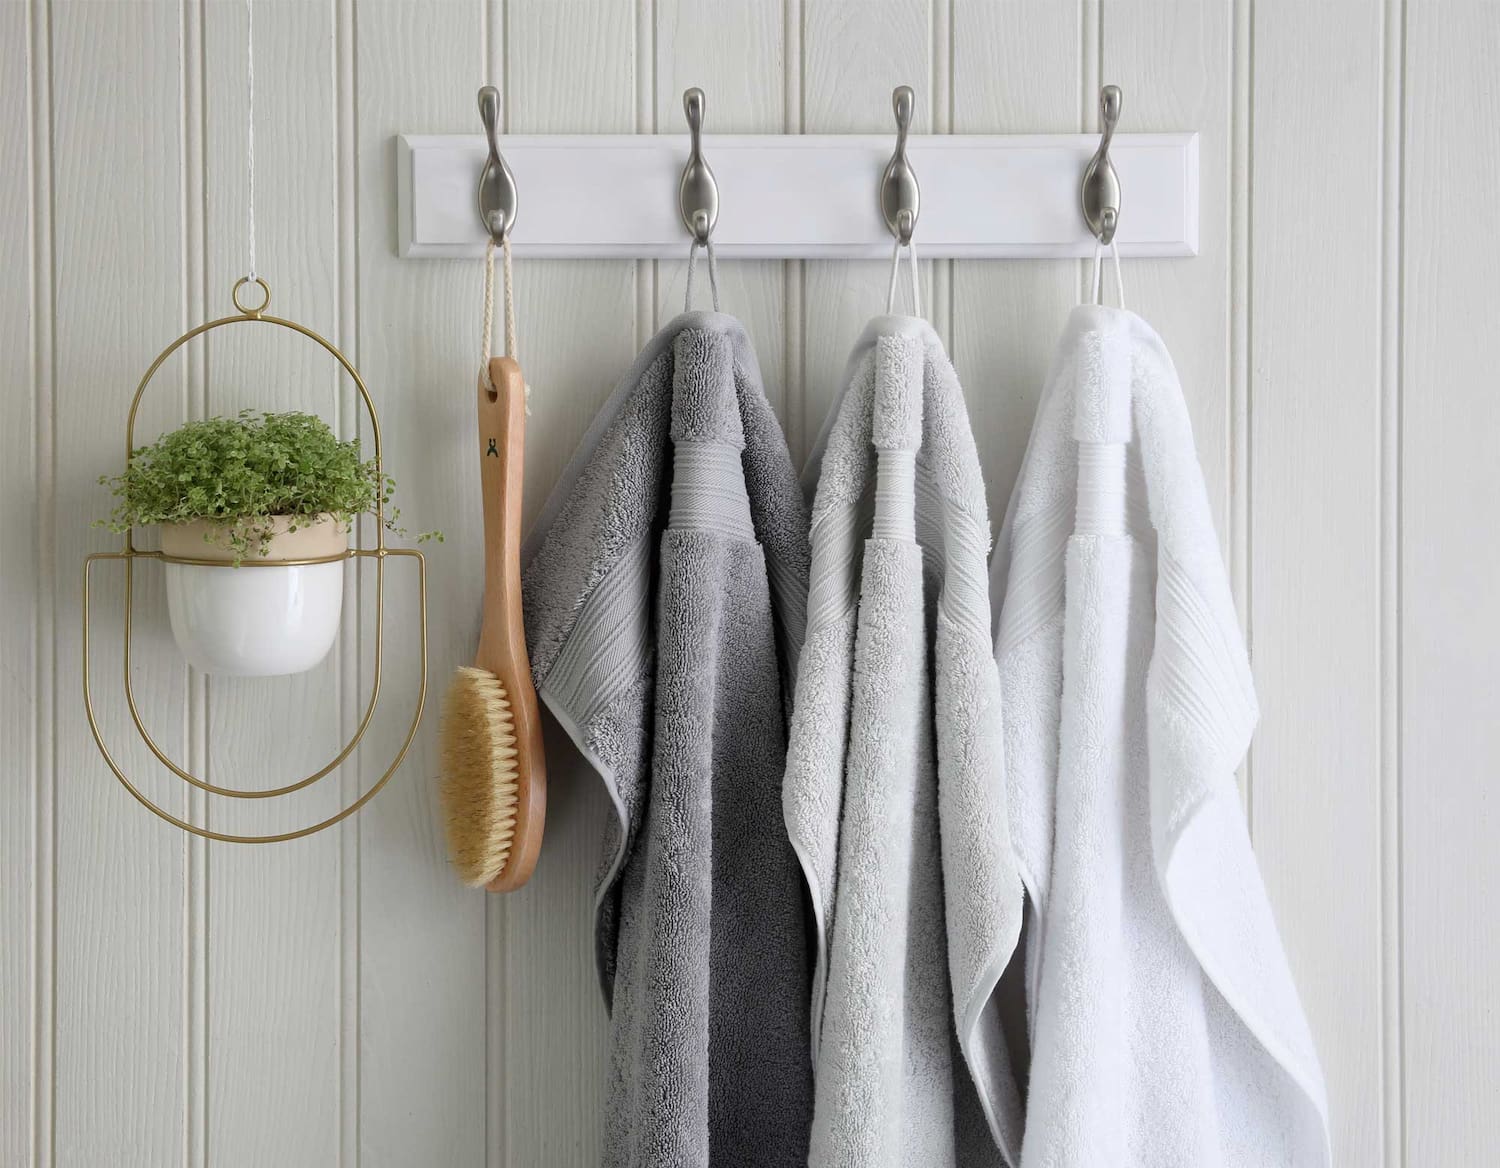 Egyptian cotton towels and back scrubber hanging from wall hooks